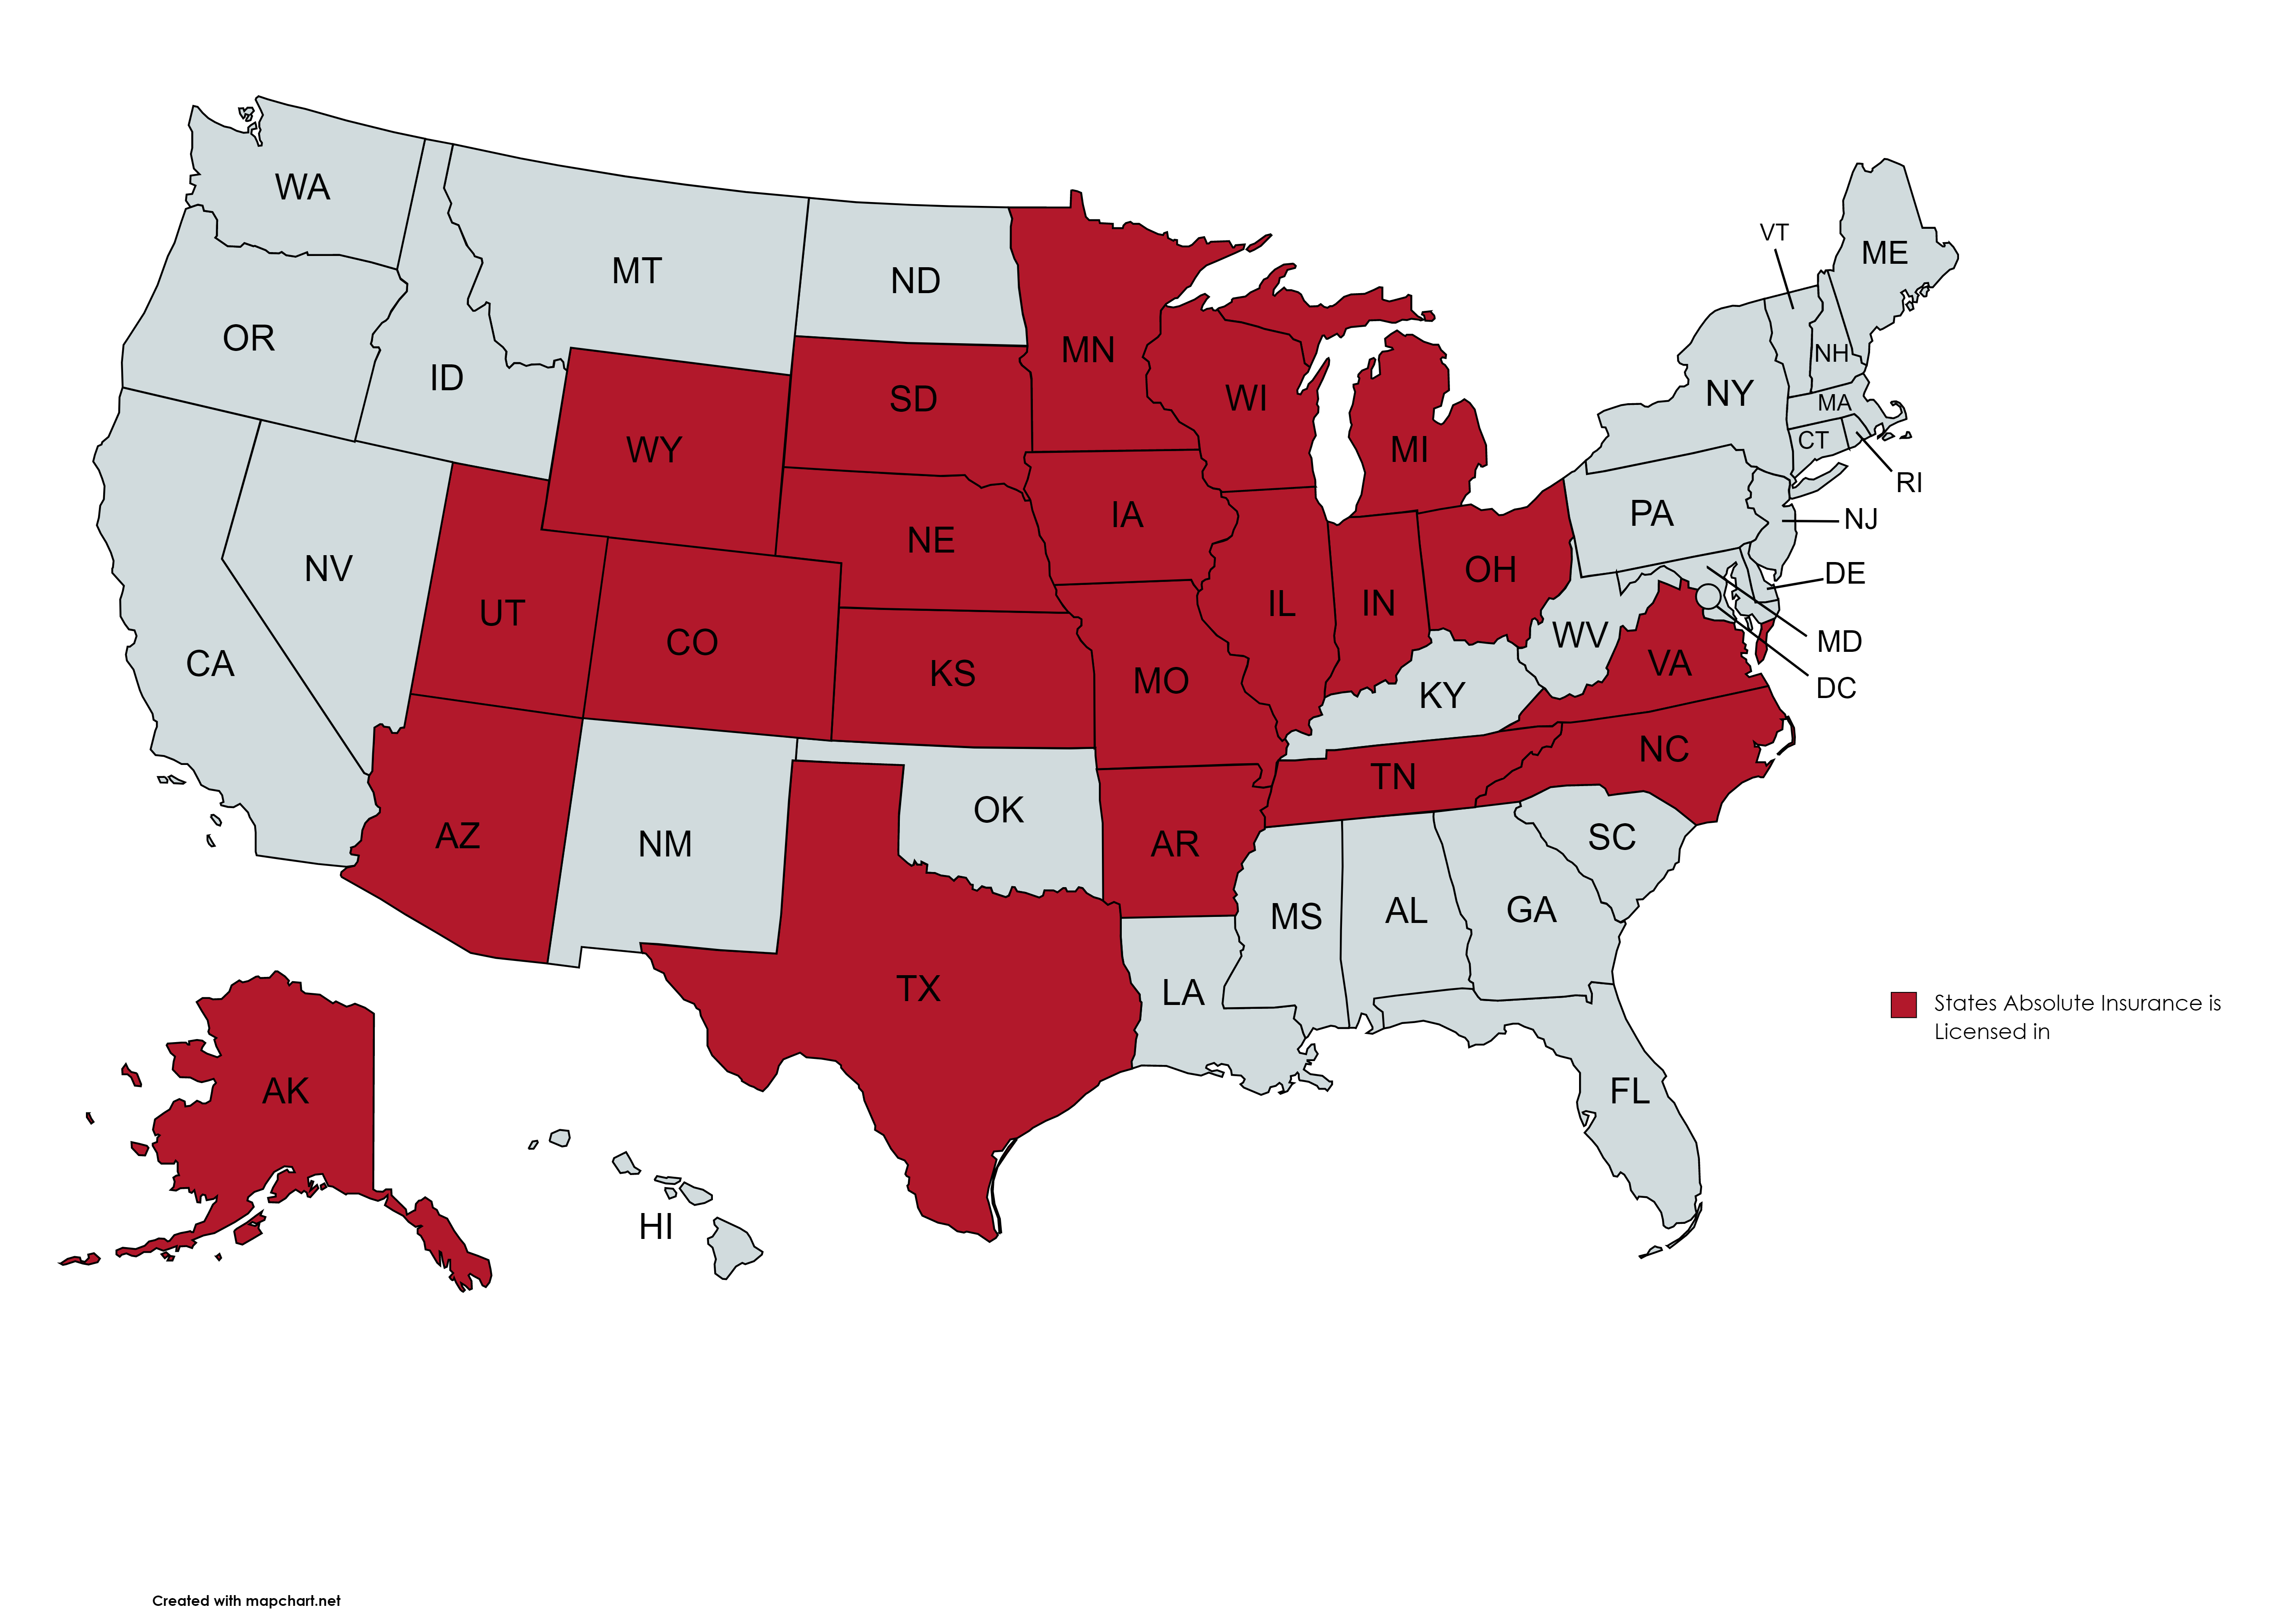 Map showing 22 states Absolute Insurance is licensed in